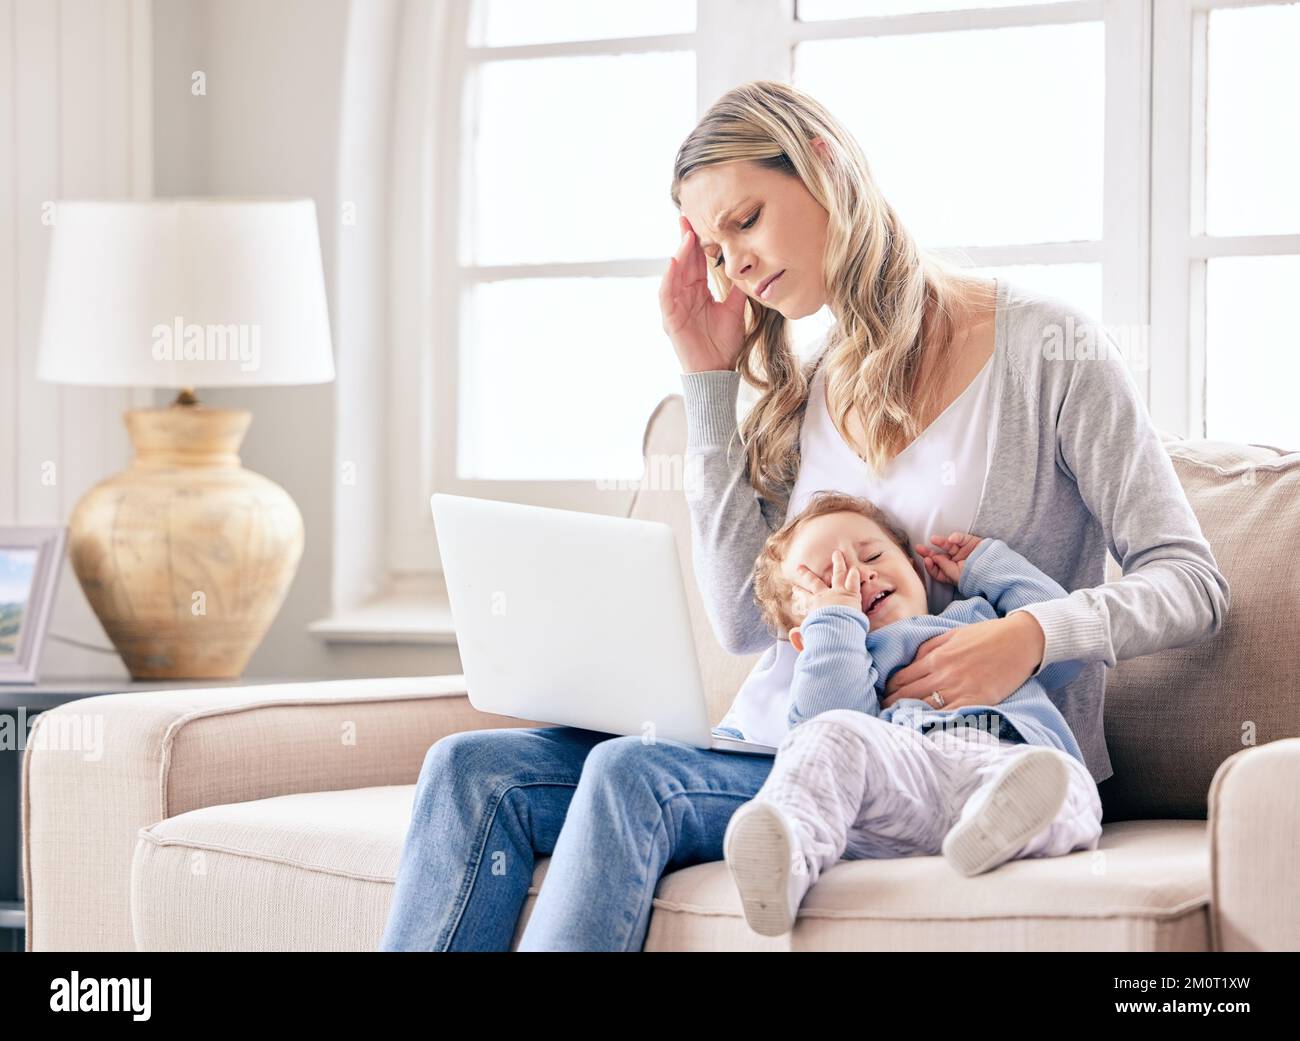 I cant work like this. a woman looking stressed while working on her laptop and sitting with her crying baby. Stock Photo